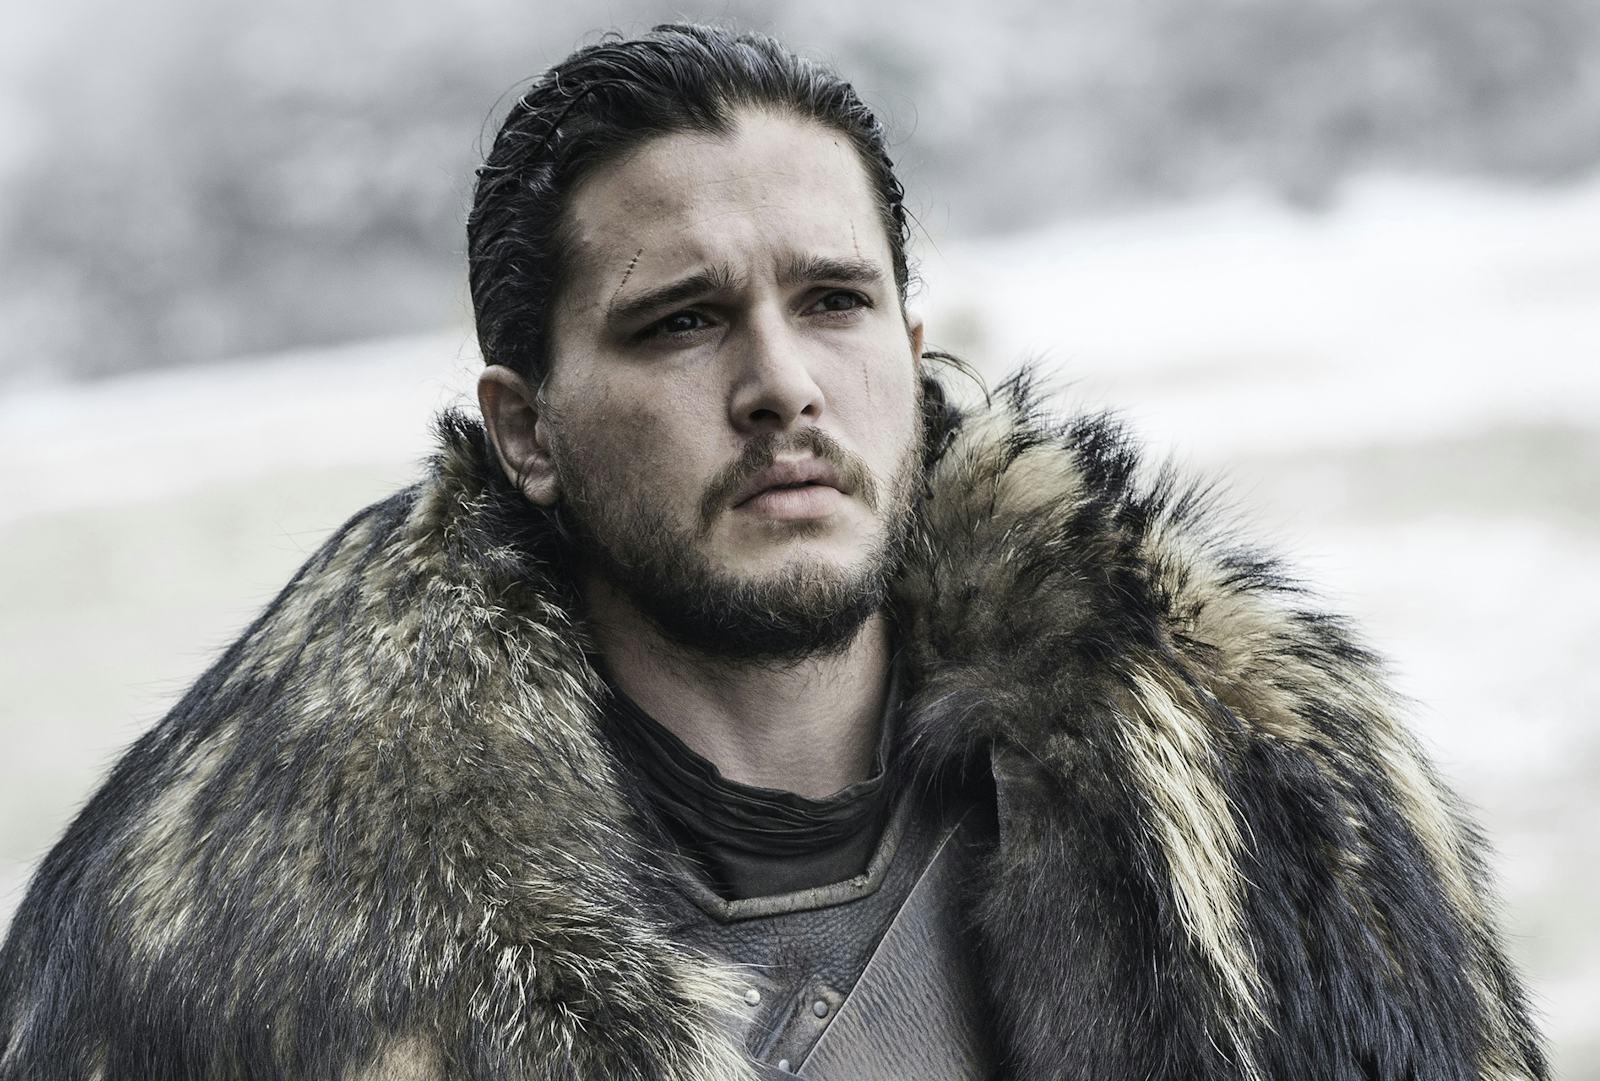 The #39 Game Of Thrones #39 Characters Kit Harington Wants To Bring Back